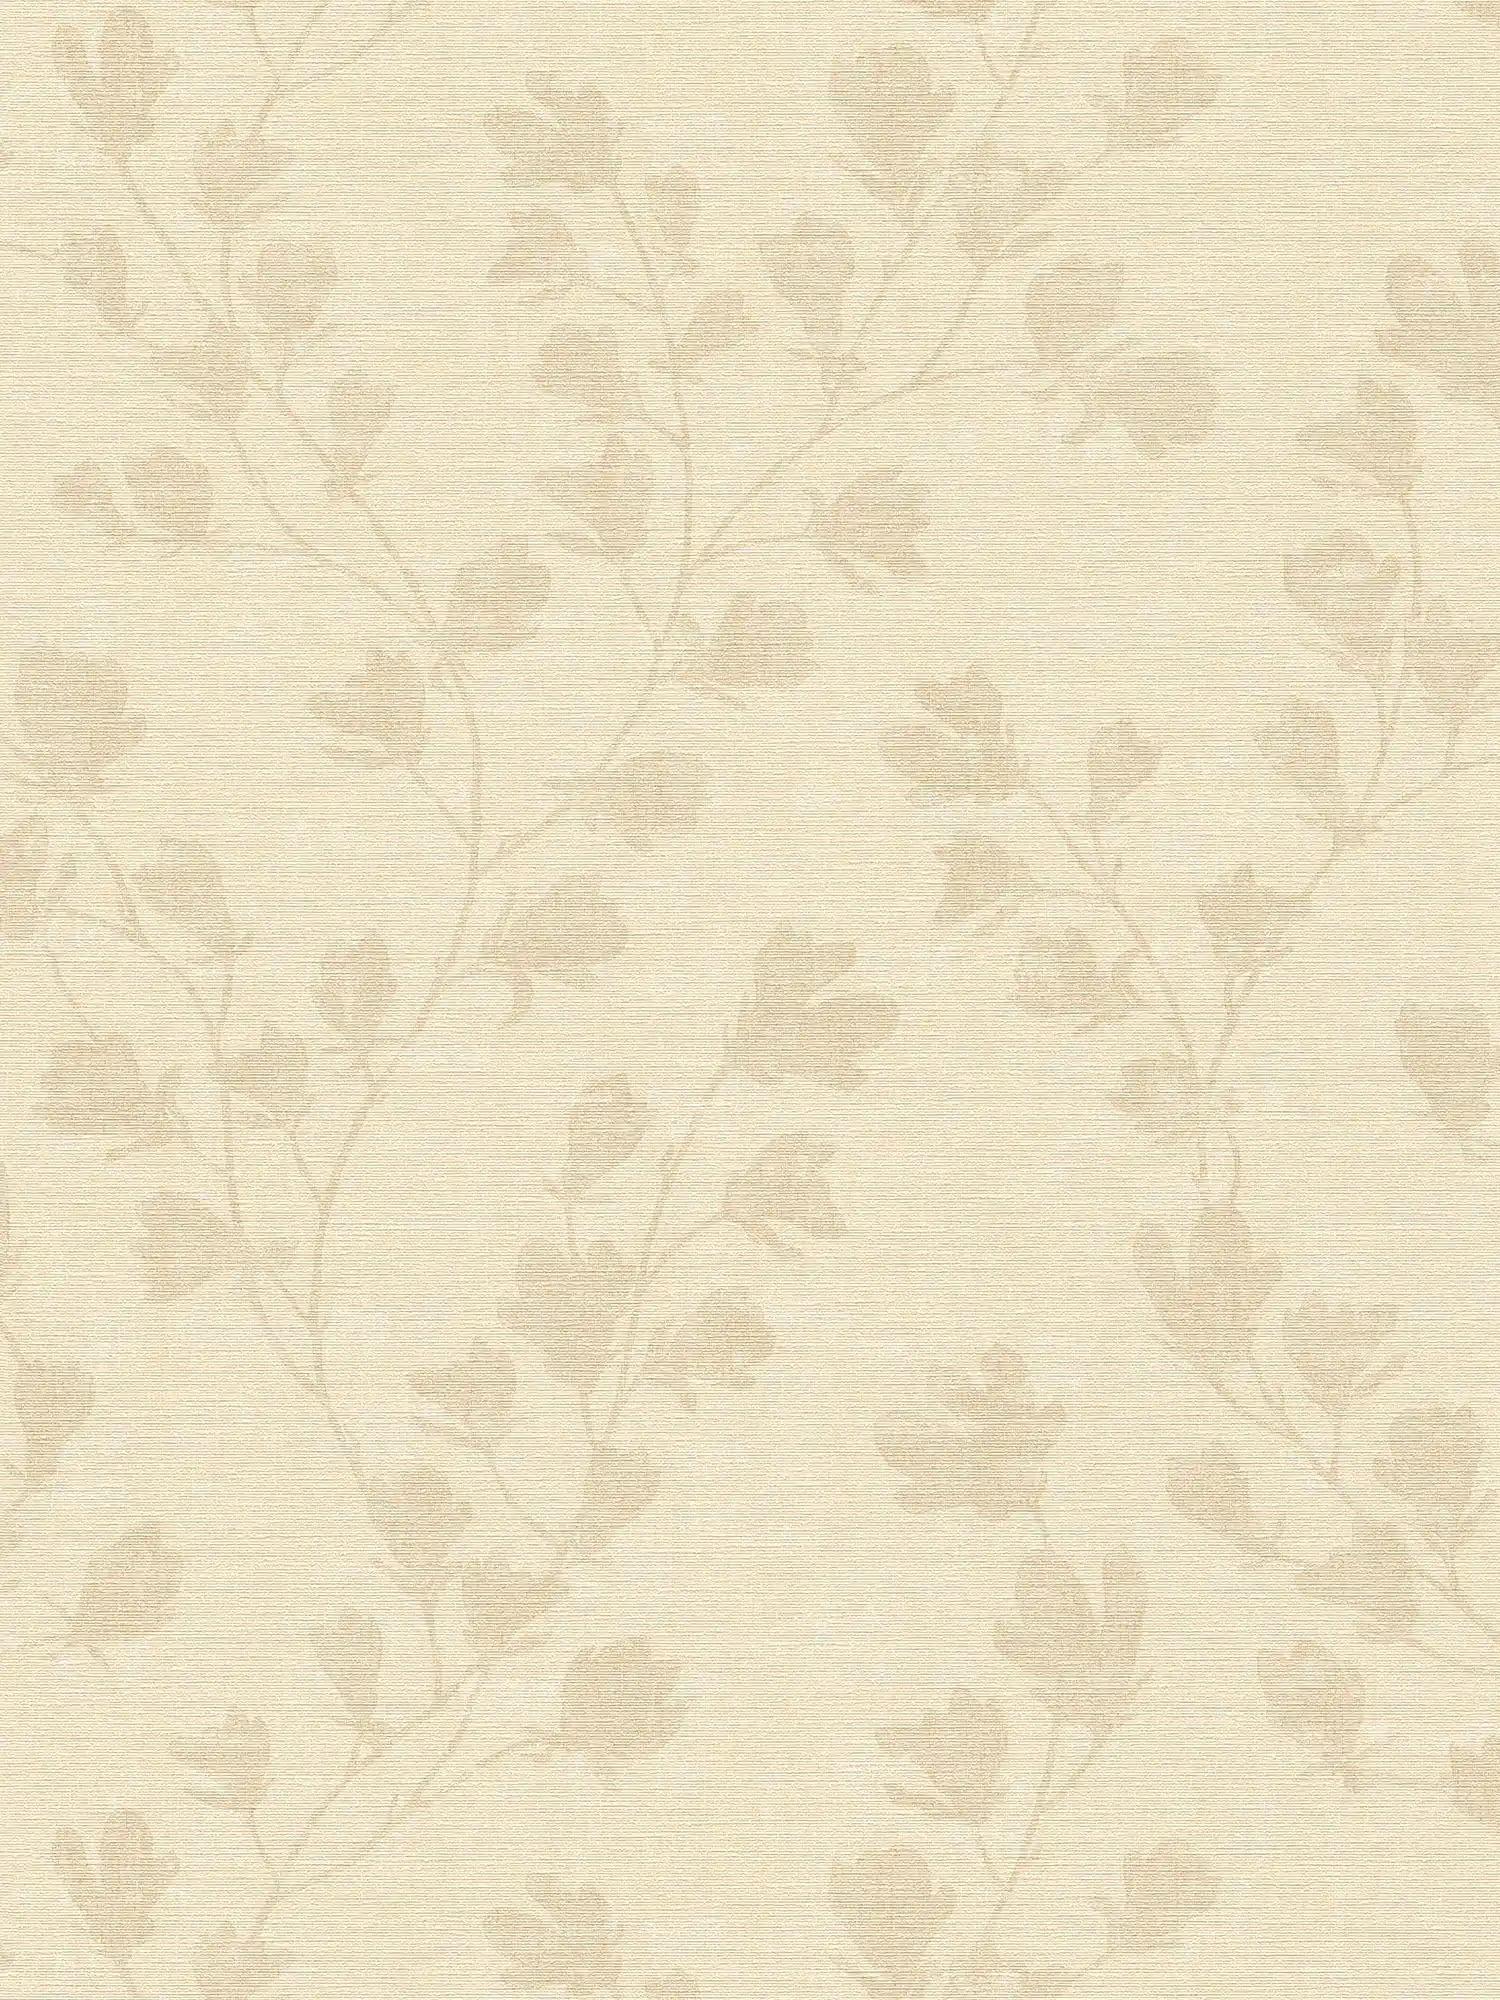 Pattern wallpaper with leaves in country style - cream, beige
